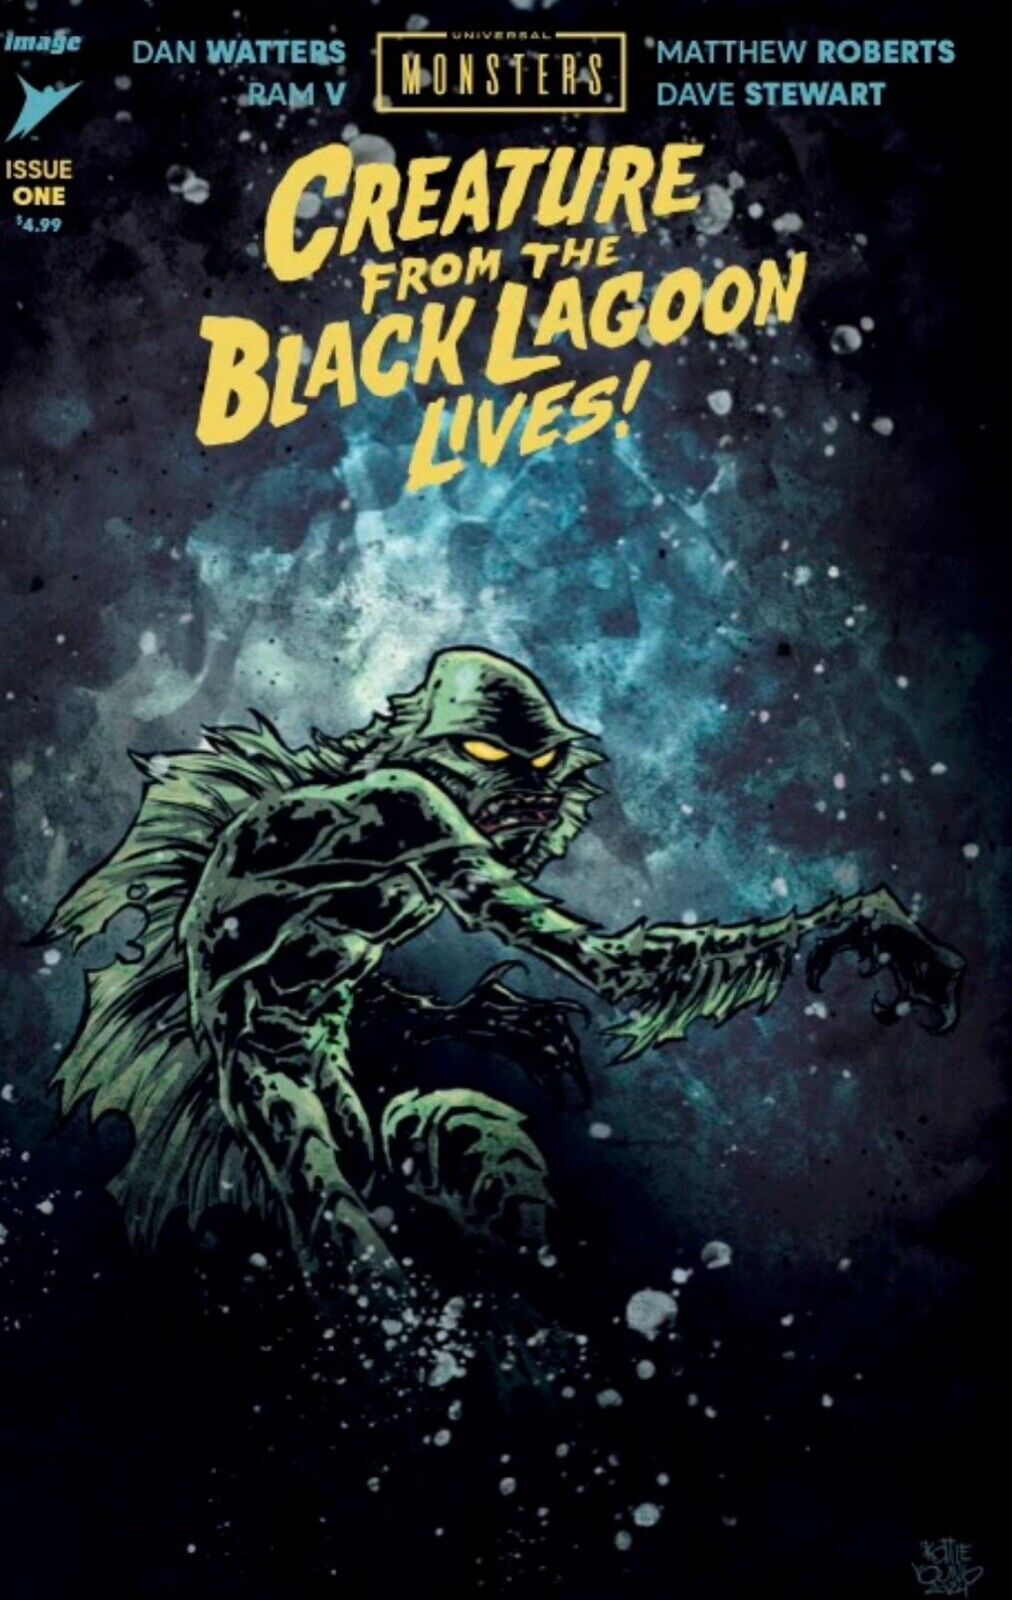 CREATURE FROM THE BLACK LAGOON LIVES #1 SKOTTIE YOUNG PRESALE 4/24